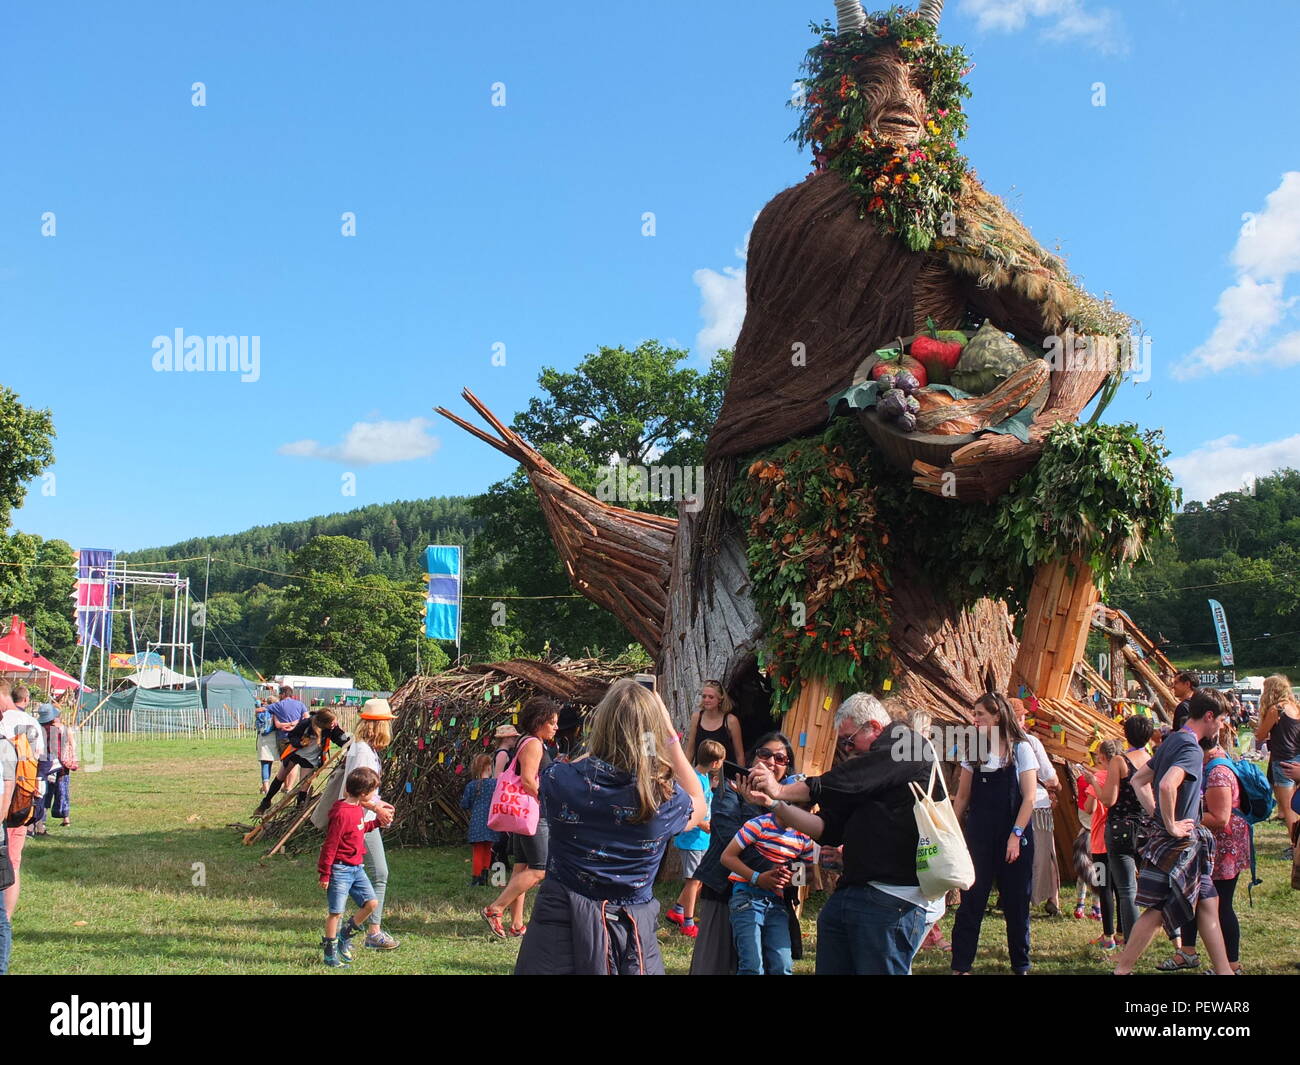 Impressive Green Man sculpture built by Pyrite Creative for the Green Man festival held in Wales. Family taking selfie in front of the Green Man. Stock Photo